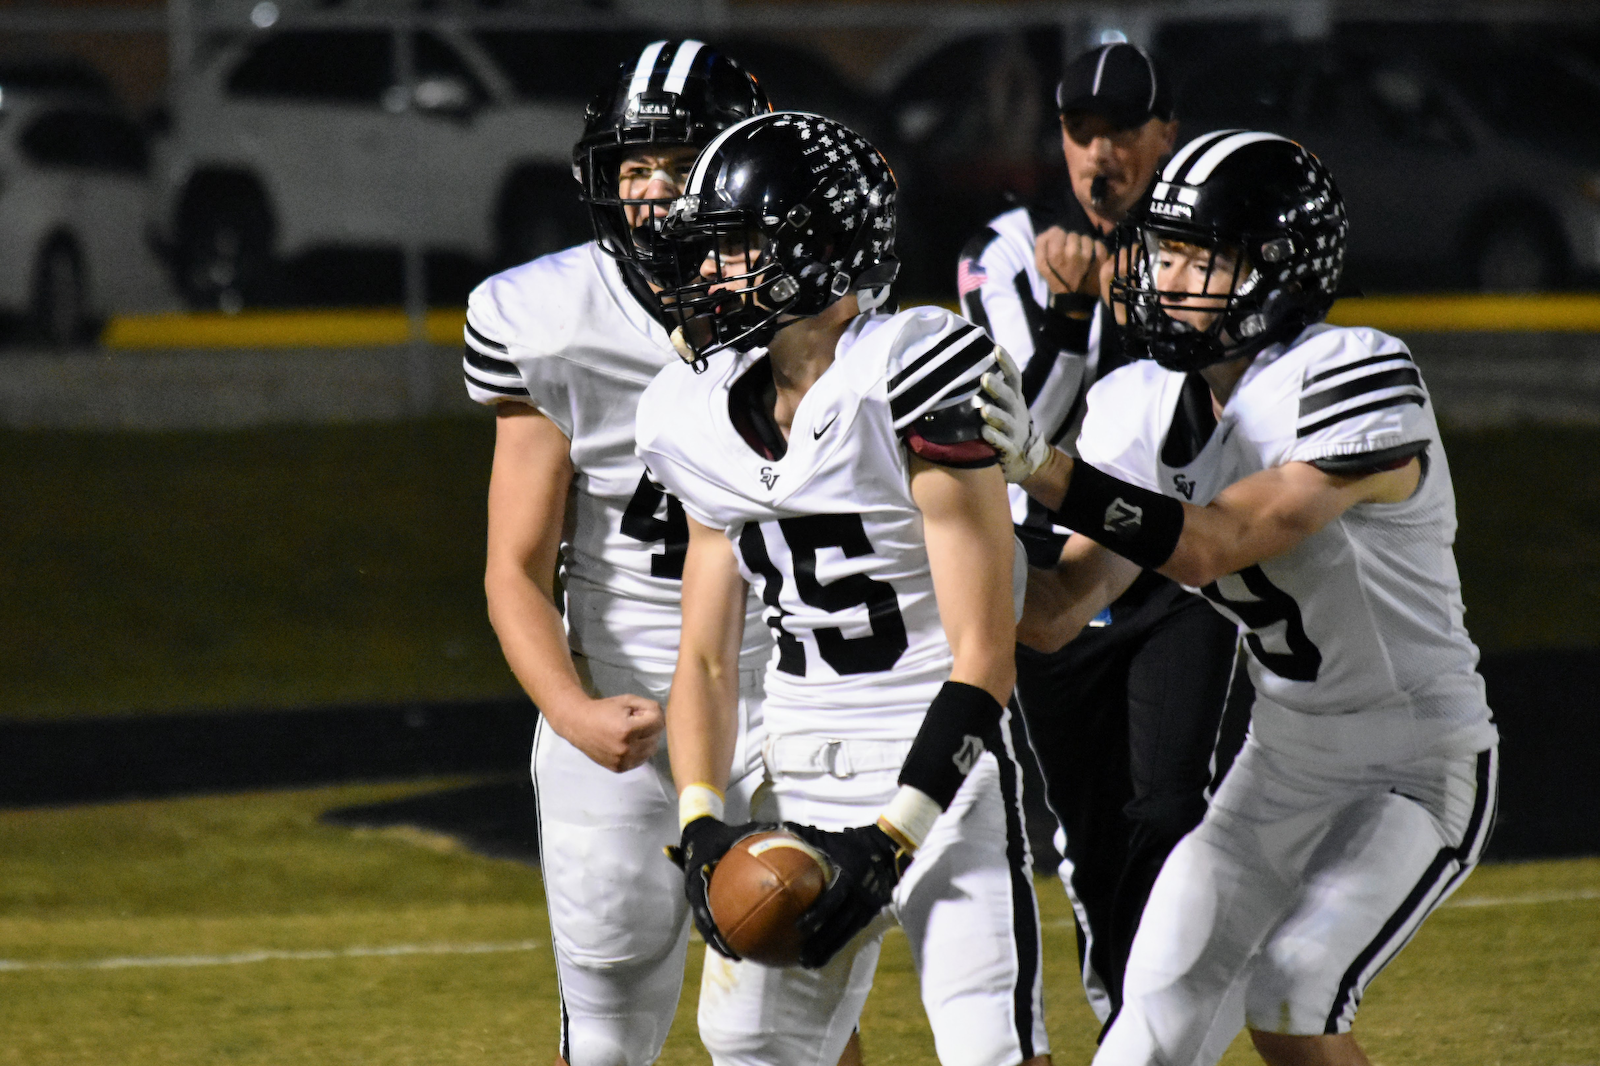 Springs Valley football travels to Perry Central gallery cover photo